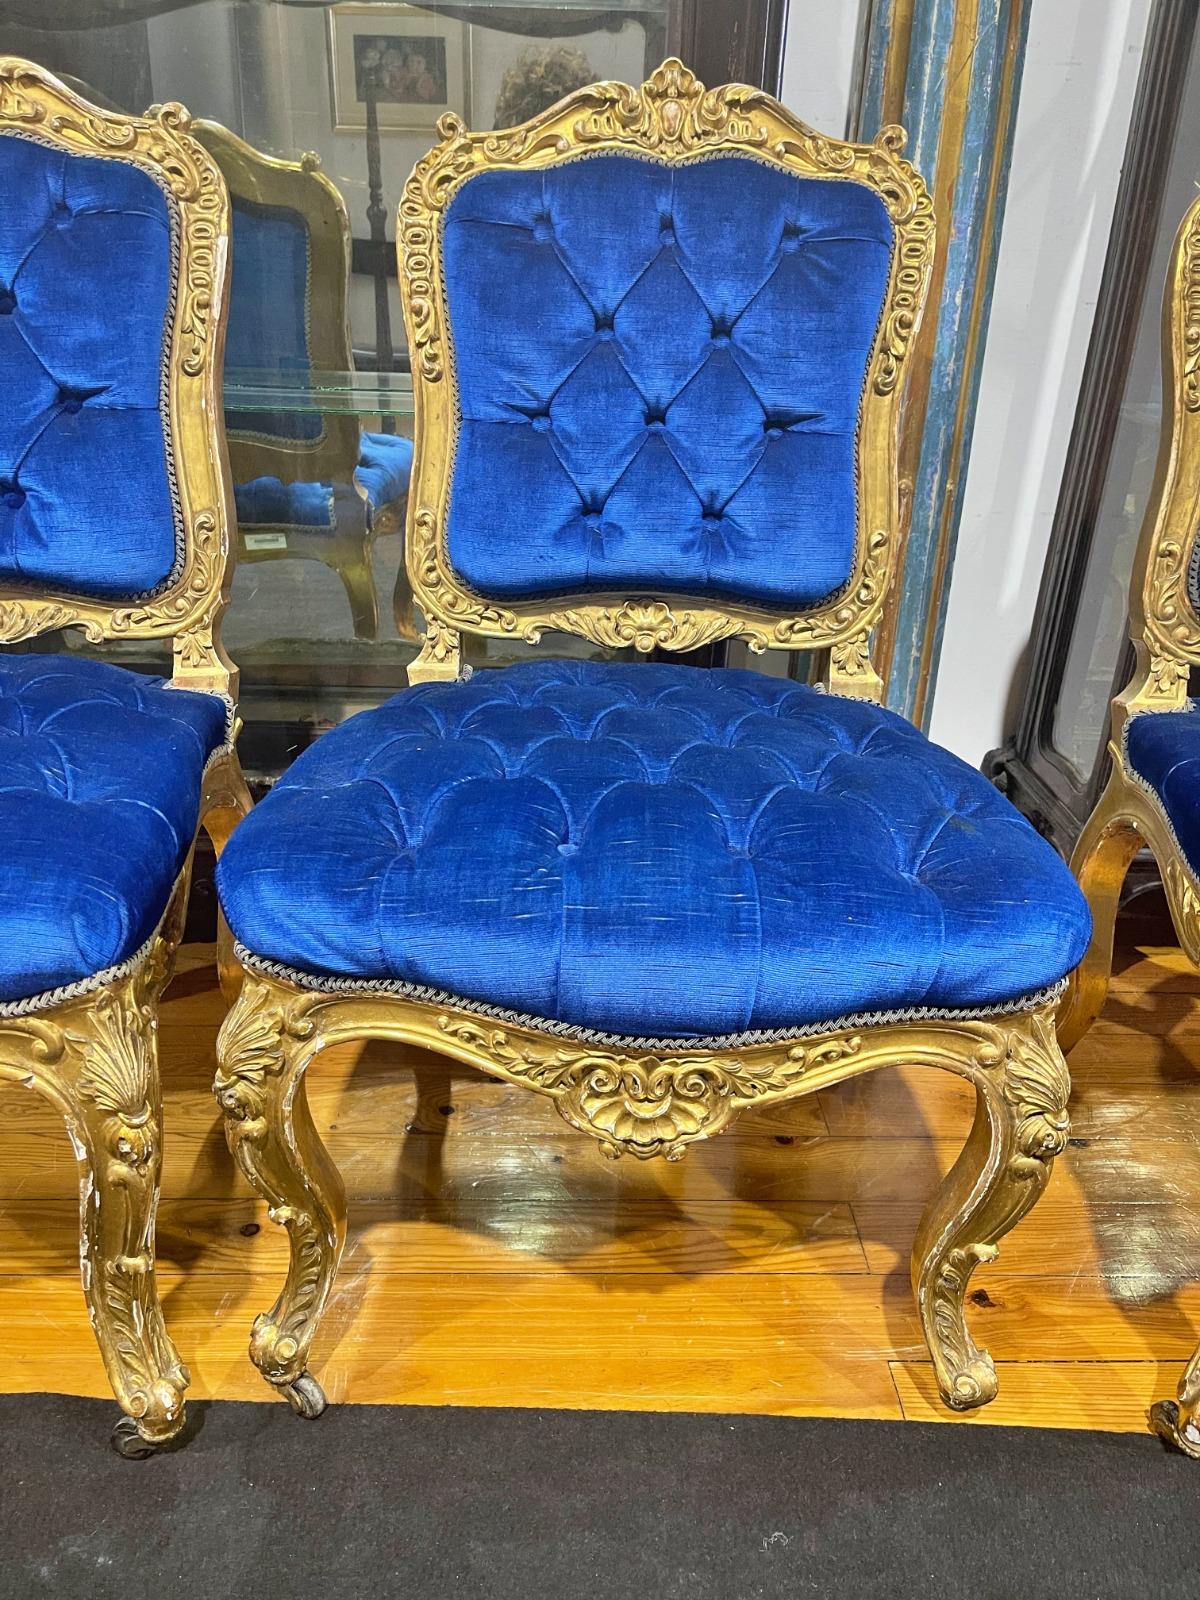 Hand-Crafted Set of French Sofa and 4 Chairs, 19th Century